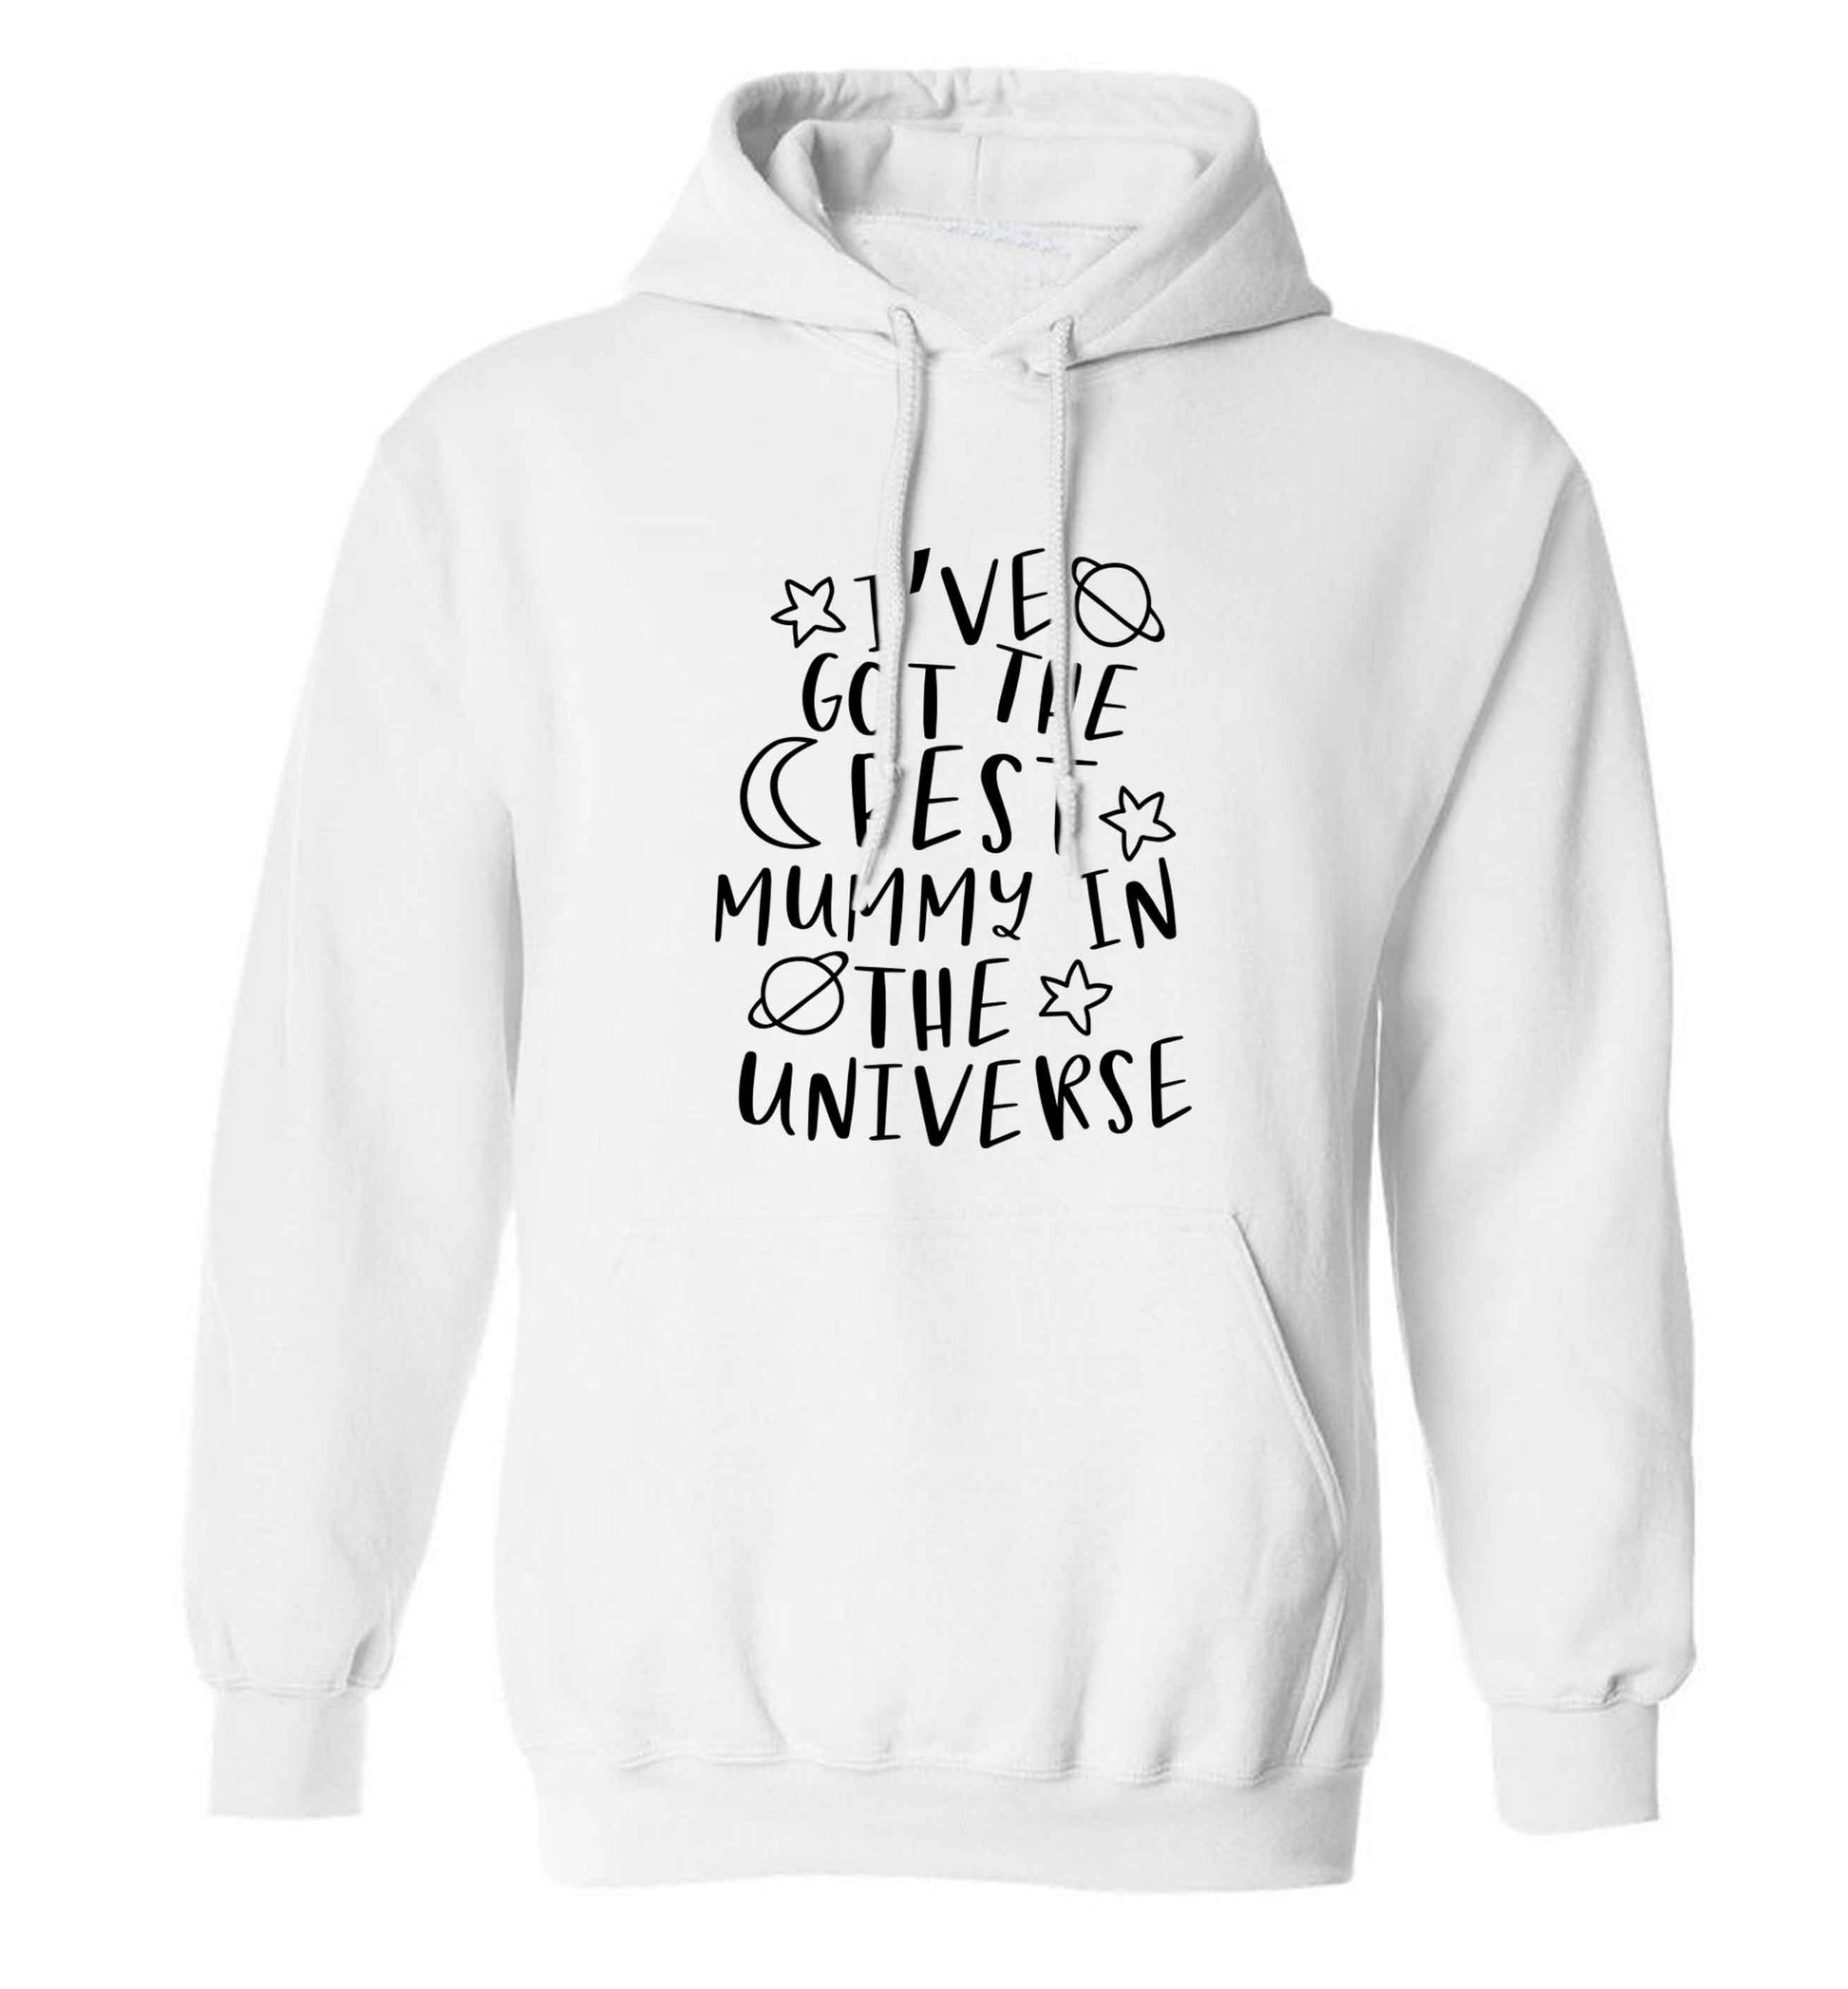 I've got the best mummy in the universe adults unisex white hoodie 2XL